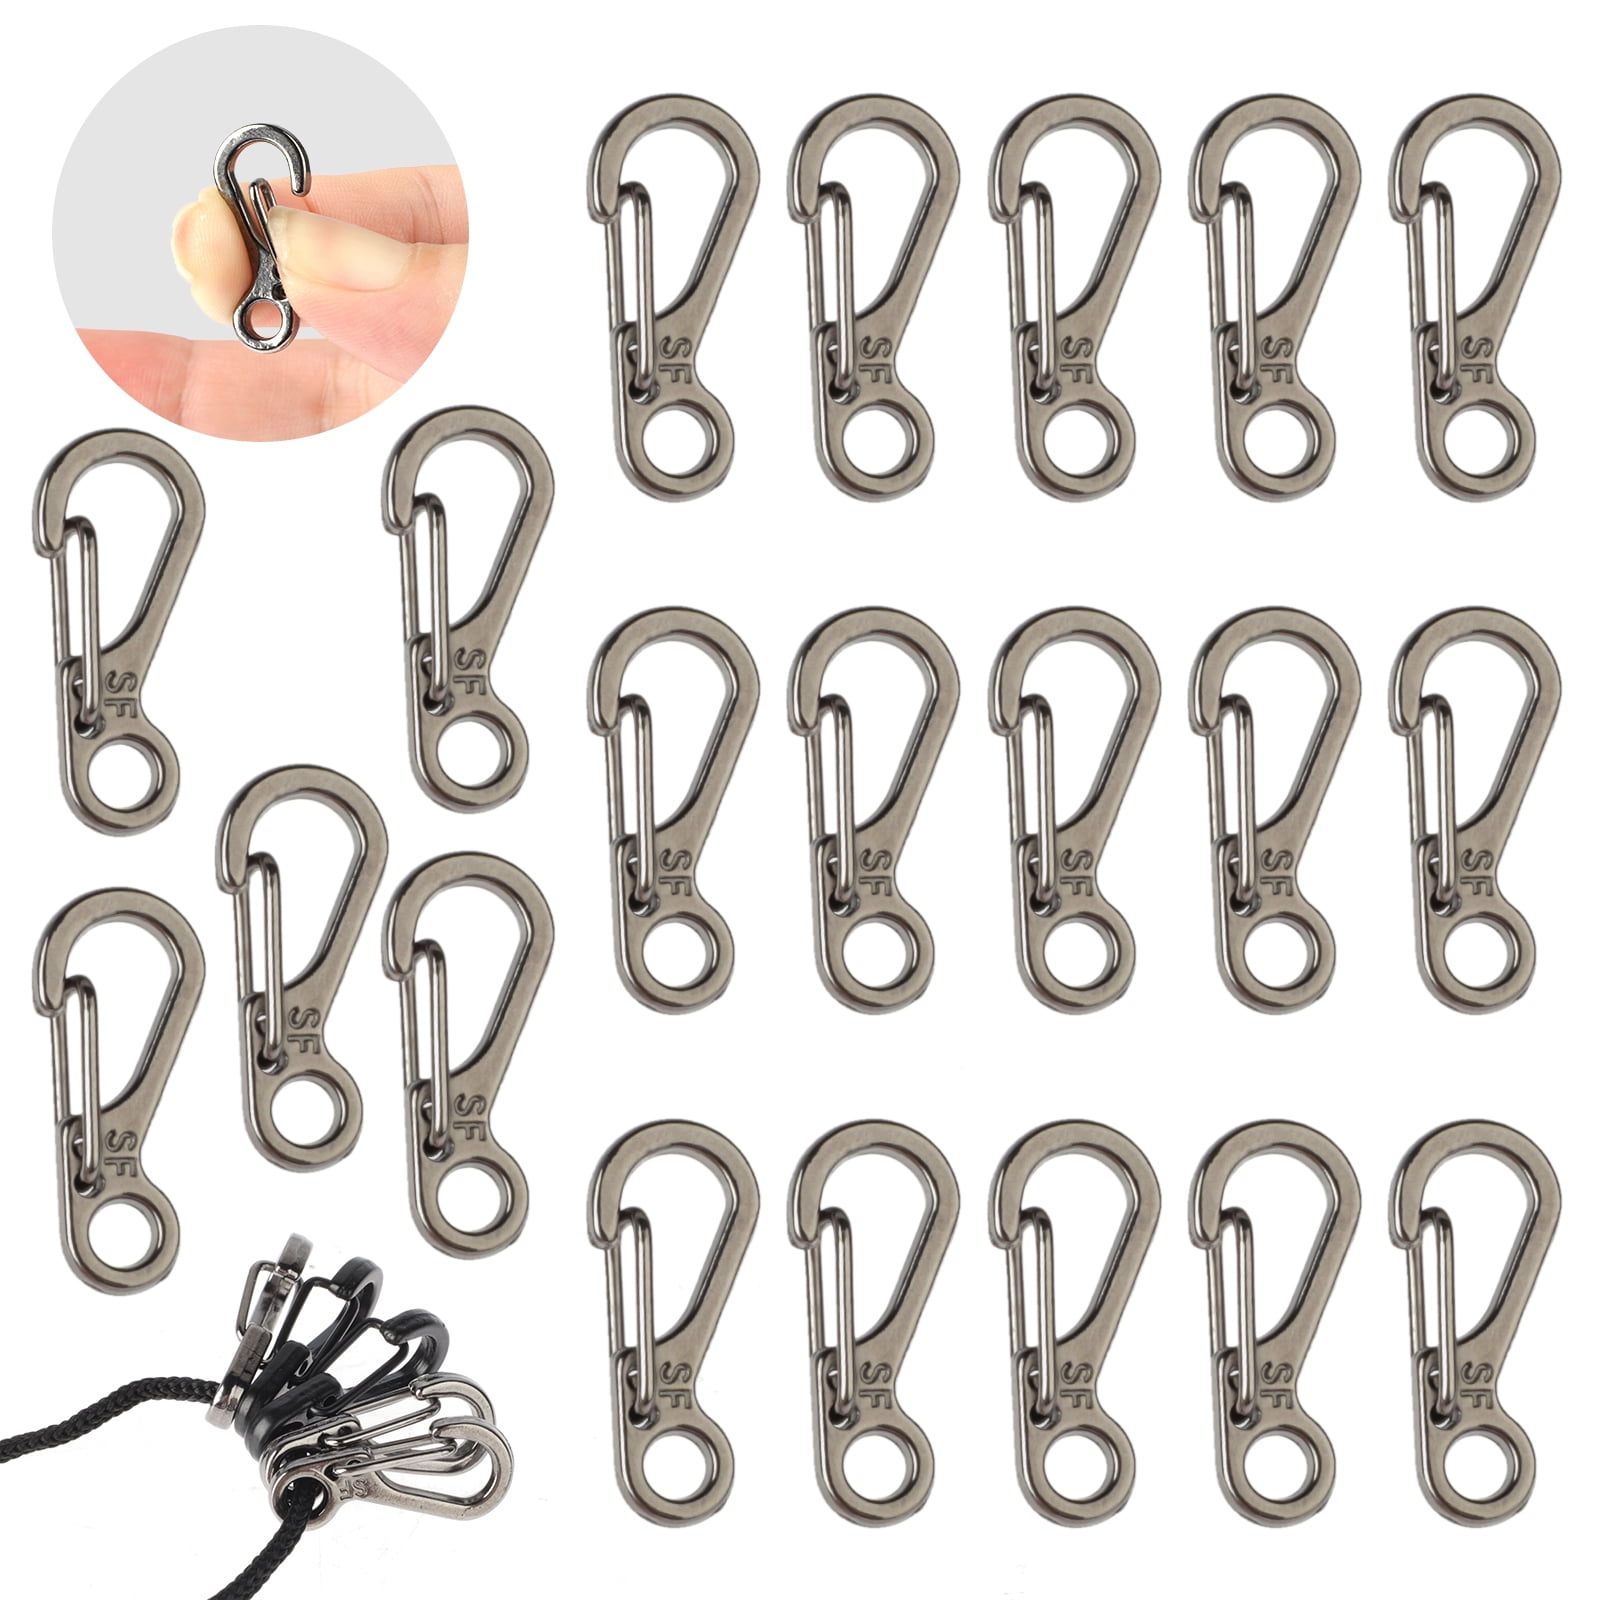 Mini Spring Hanging Buckle Snap Clip Hook for SF Key Chain Carabiner HOT SALE 